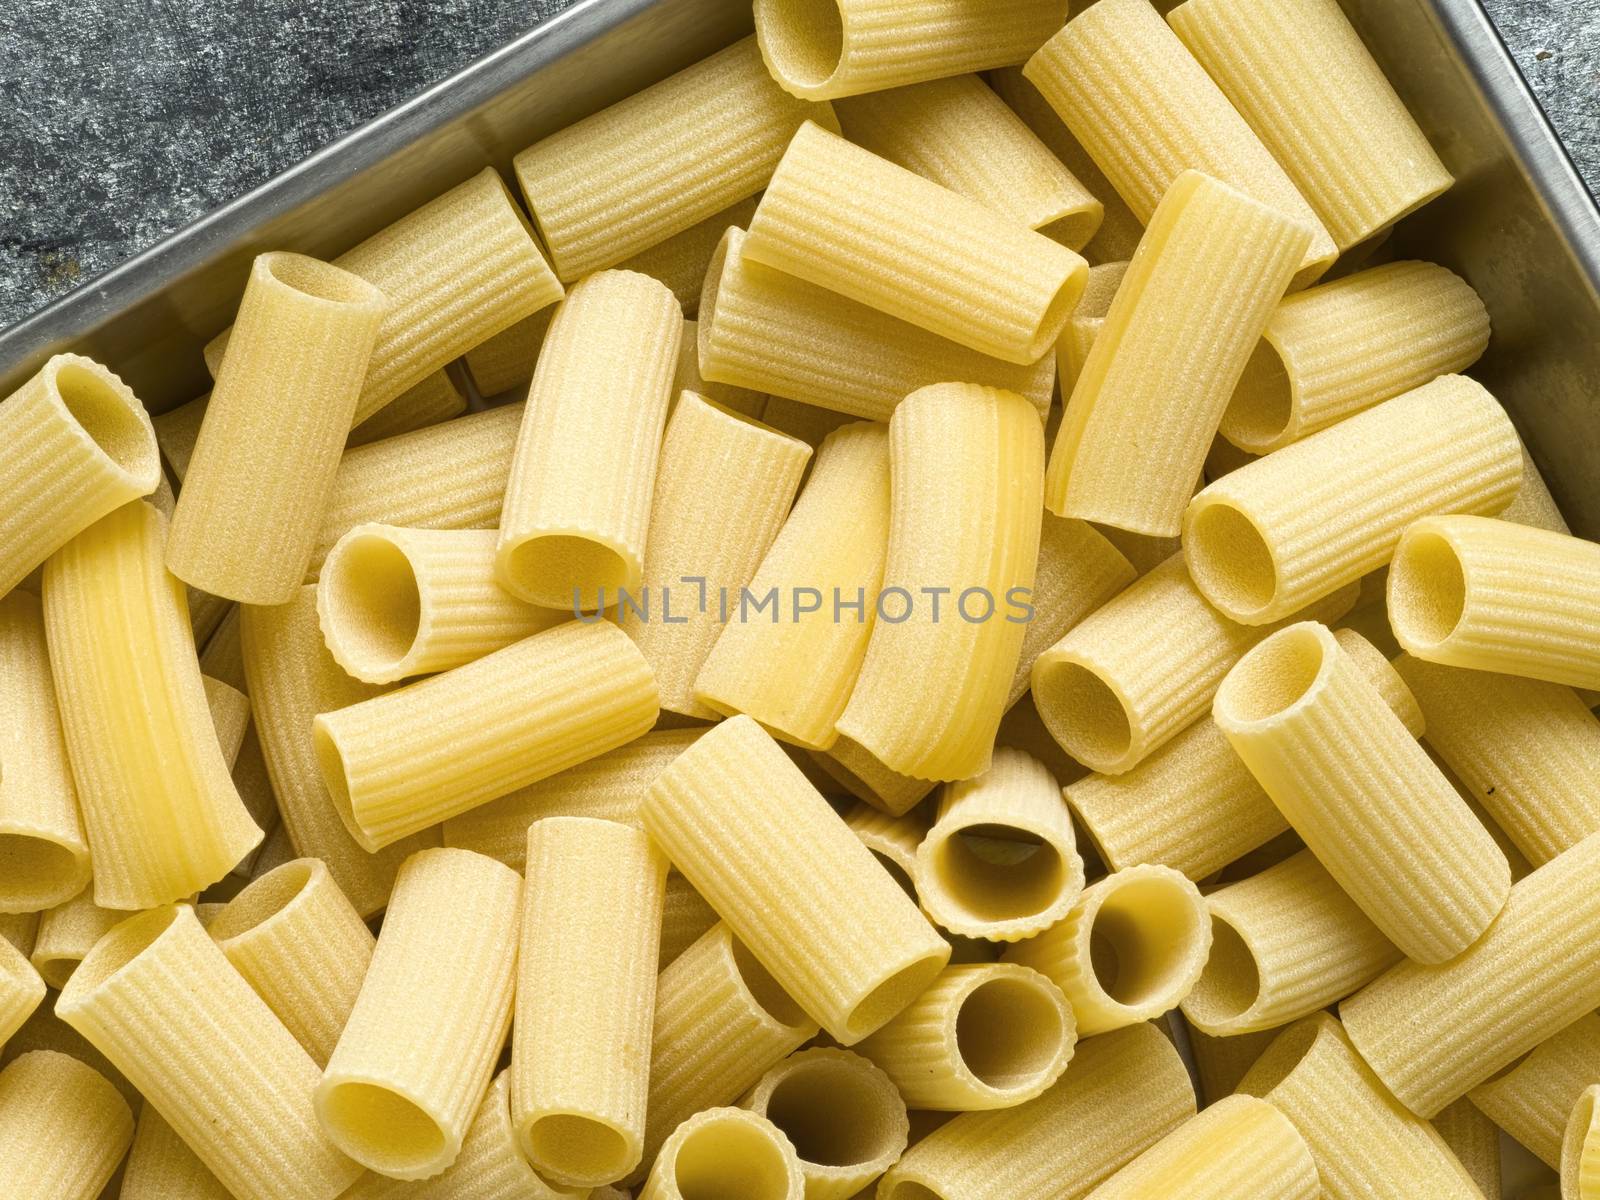 rustic uncooked italian rigatoni pasta by zkruger